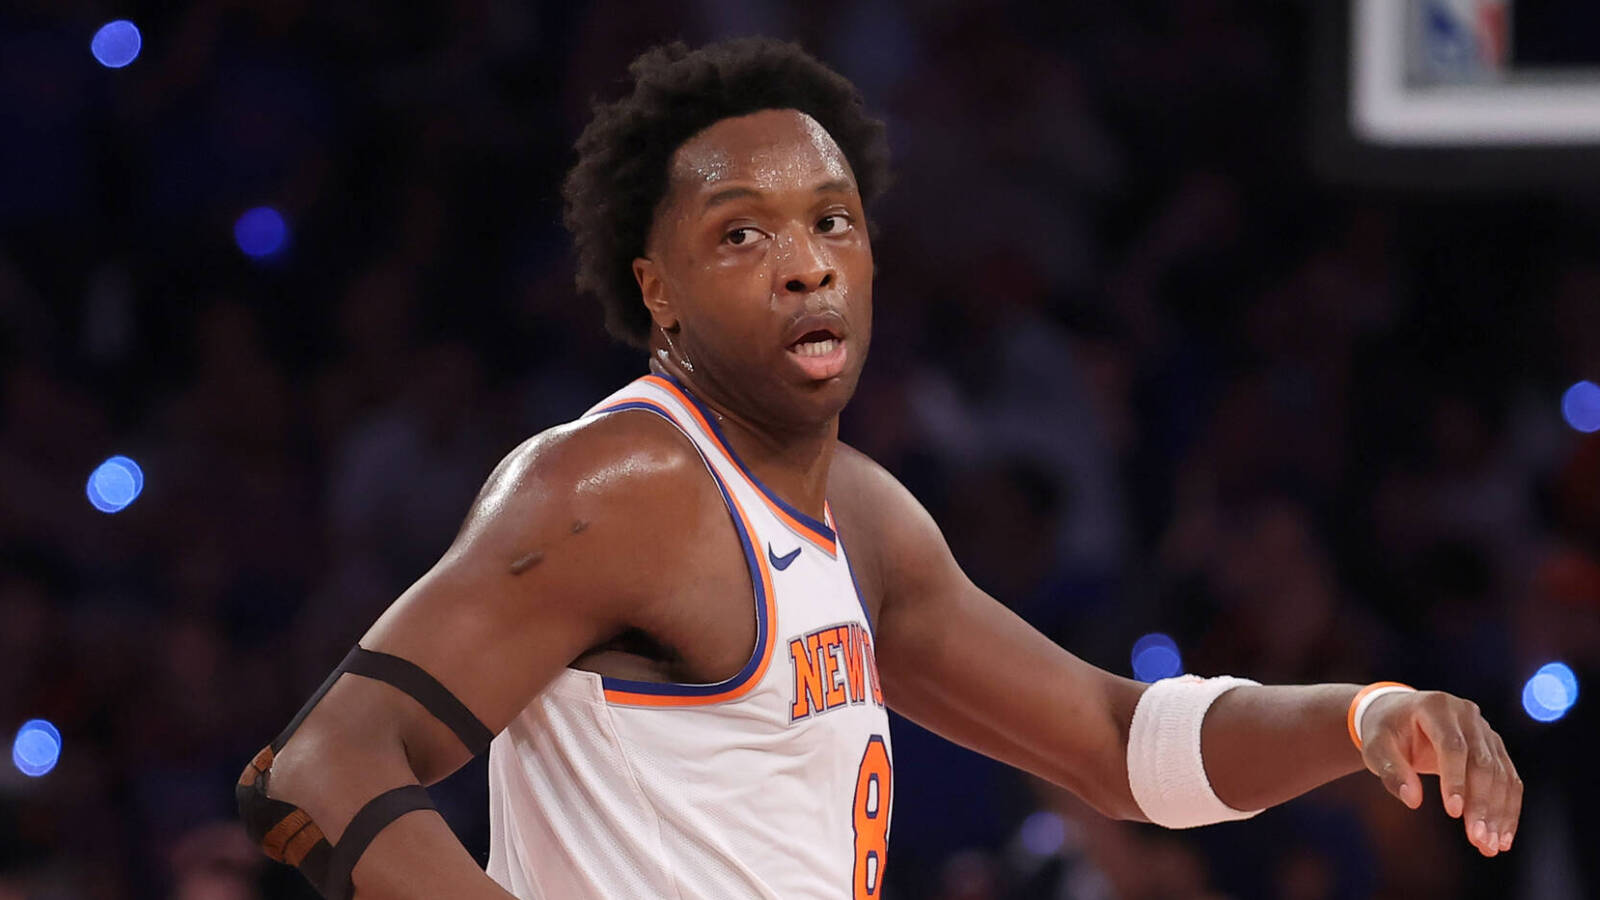 Knicks star ruled out for potential closeout game